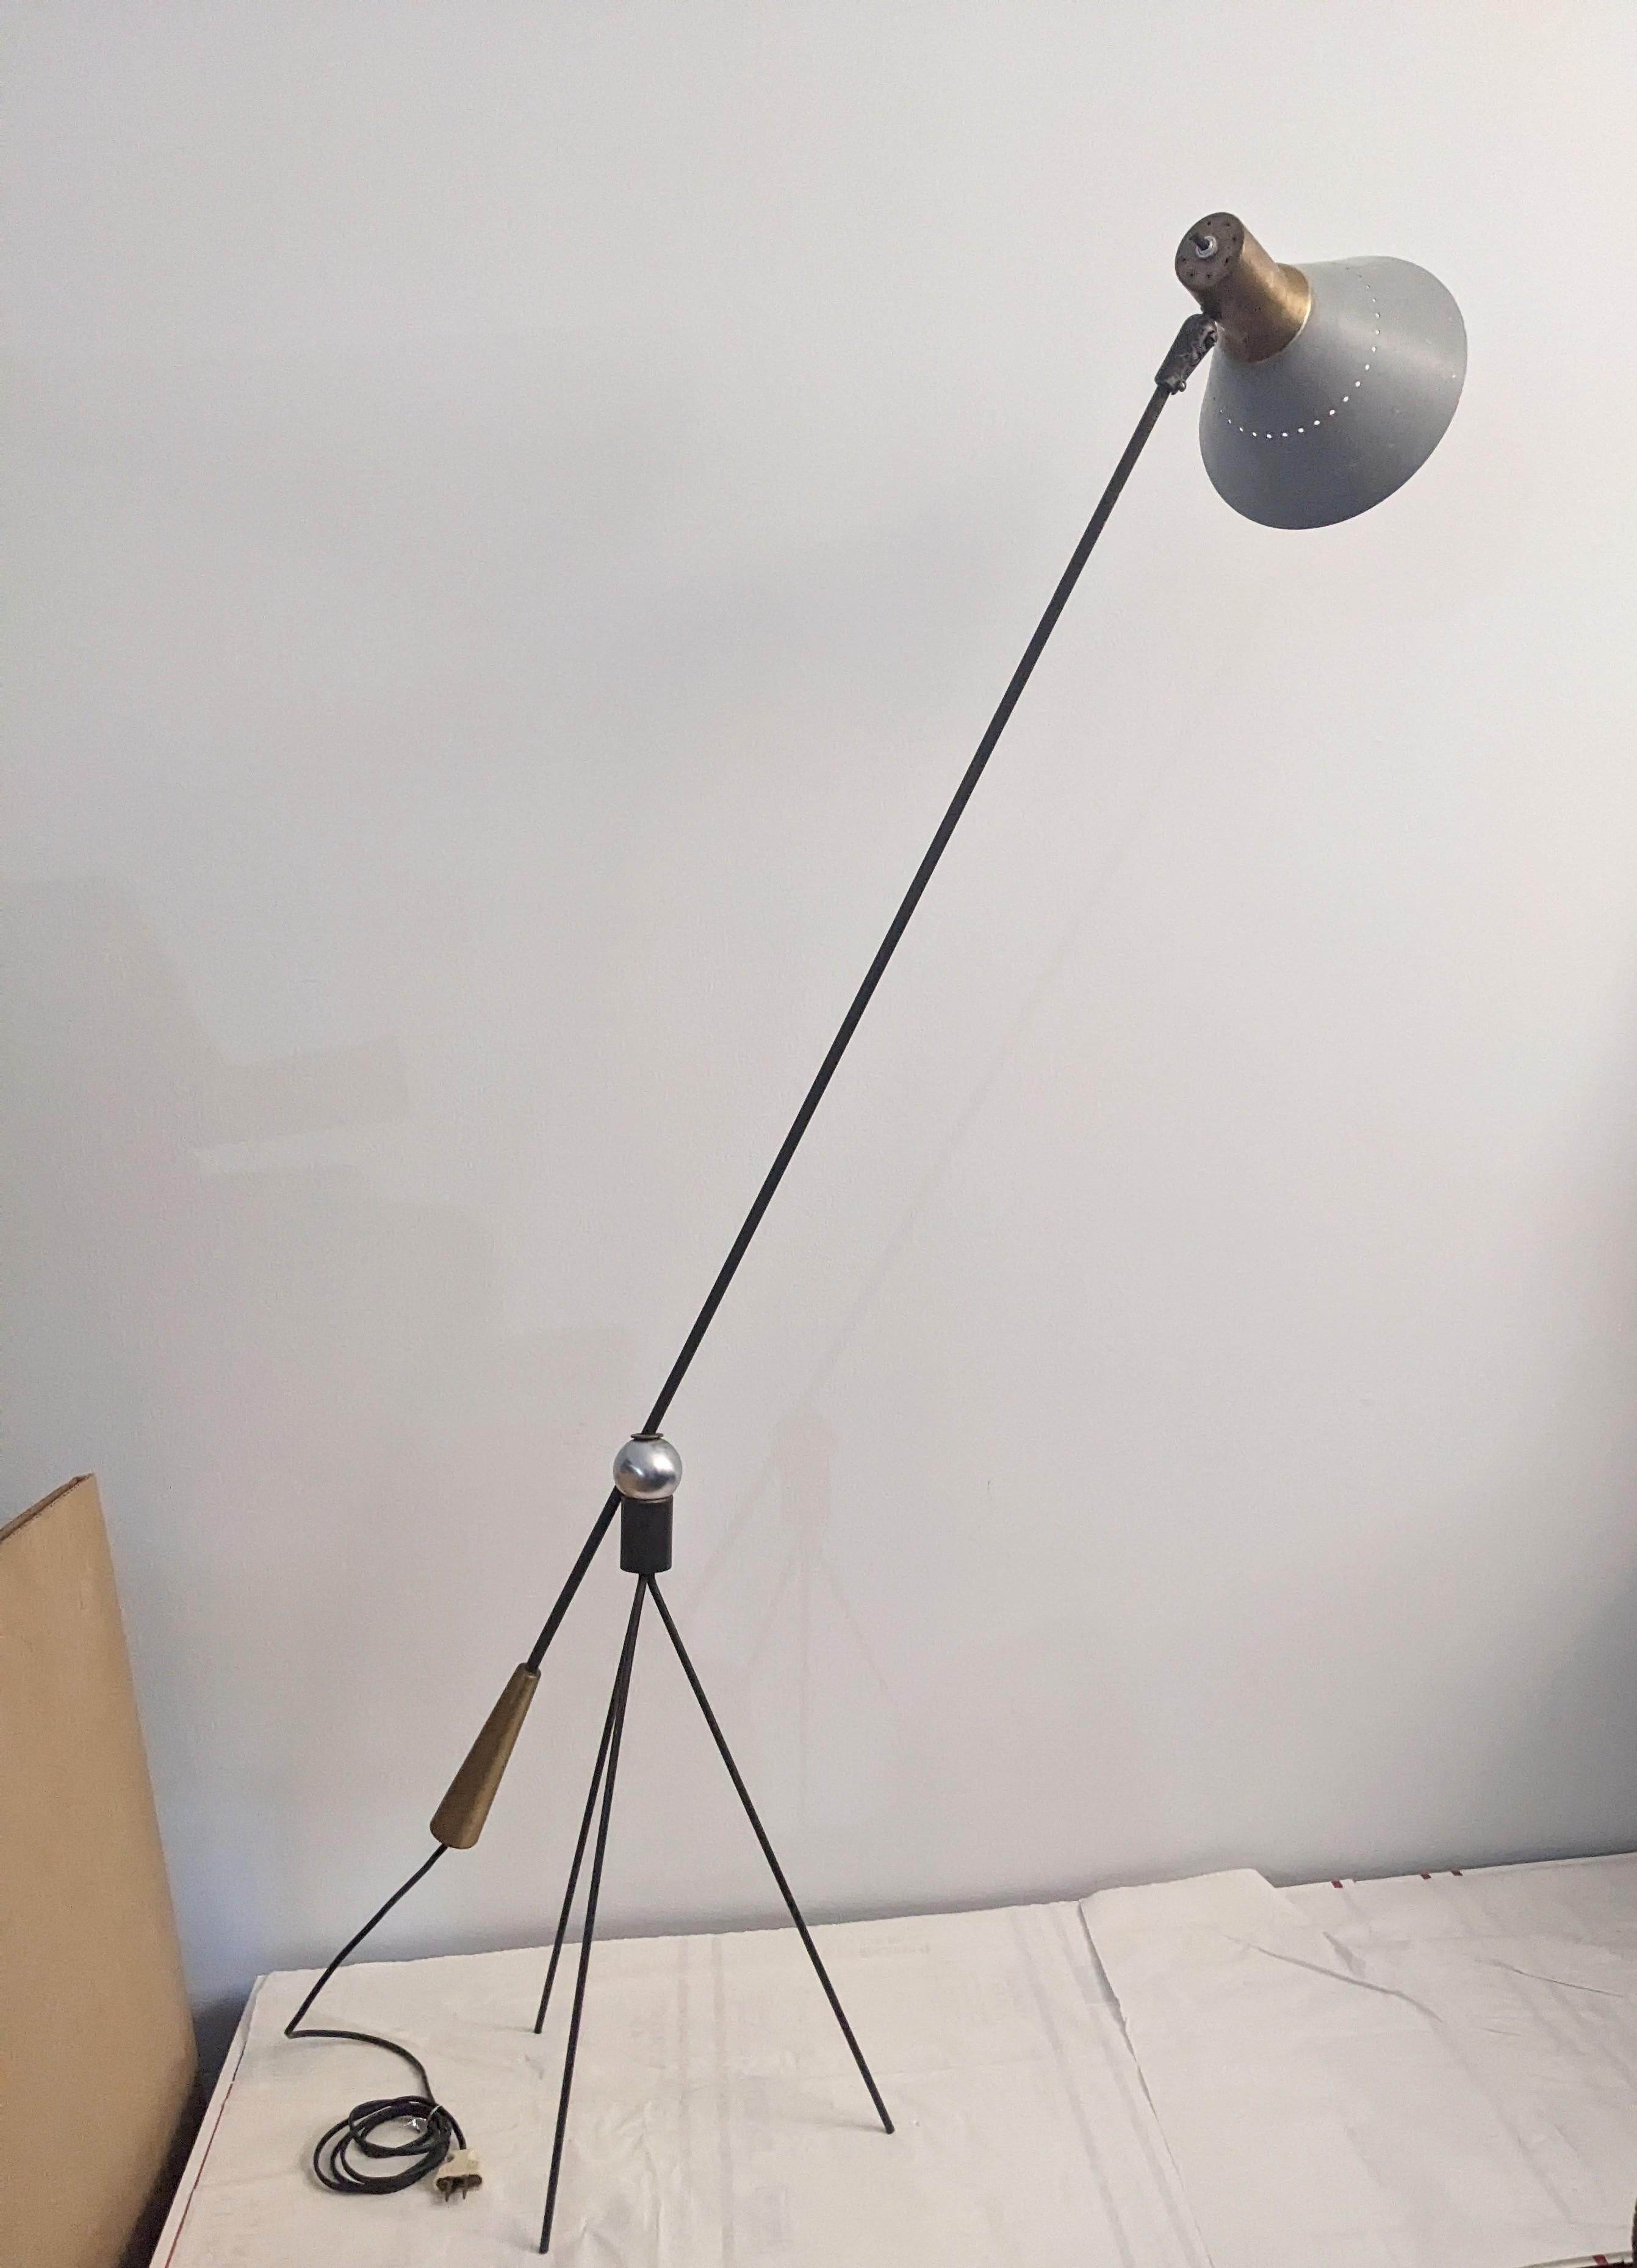 Iconic Mid Century Watrous Floor Lamp with a magnetic socket allowing change to multiple heights and positions. Amazing design allows steel ball to swivel in all directions. Original finish with grey enamel shade. Design in the Museum of Modern Art